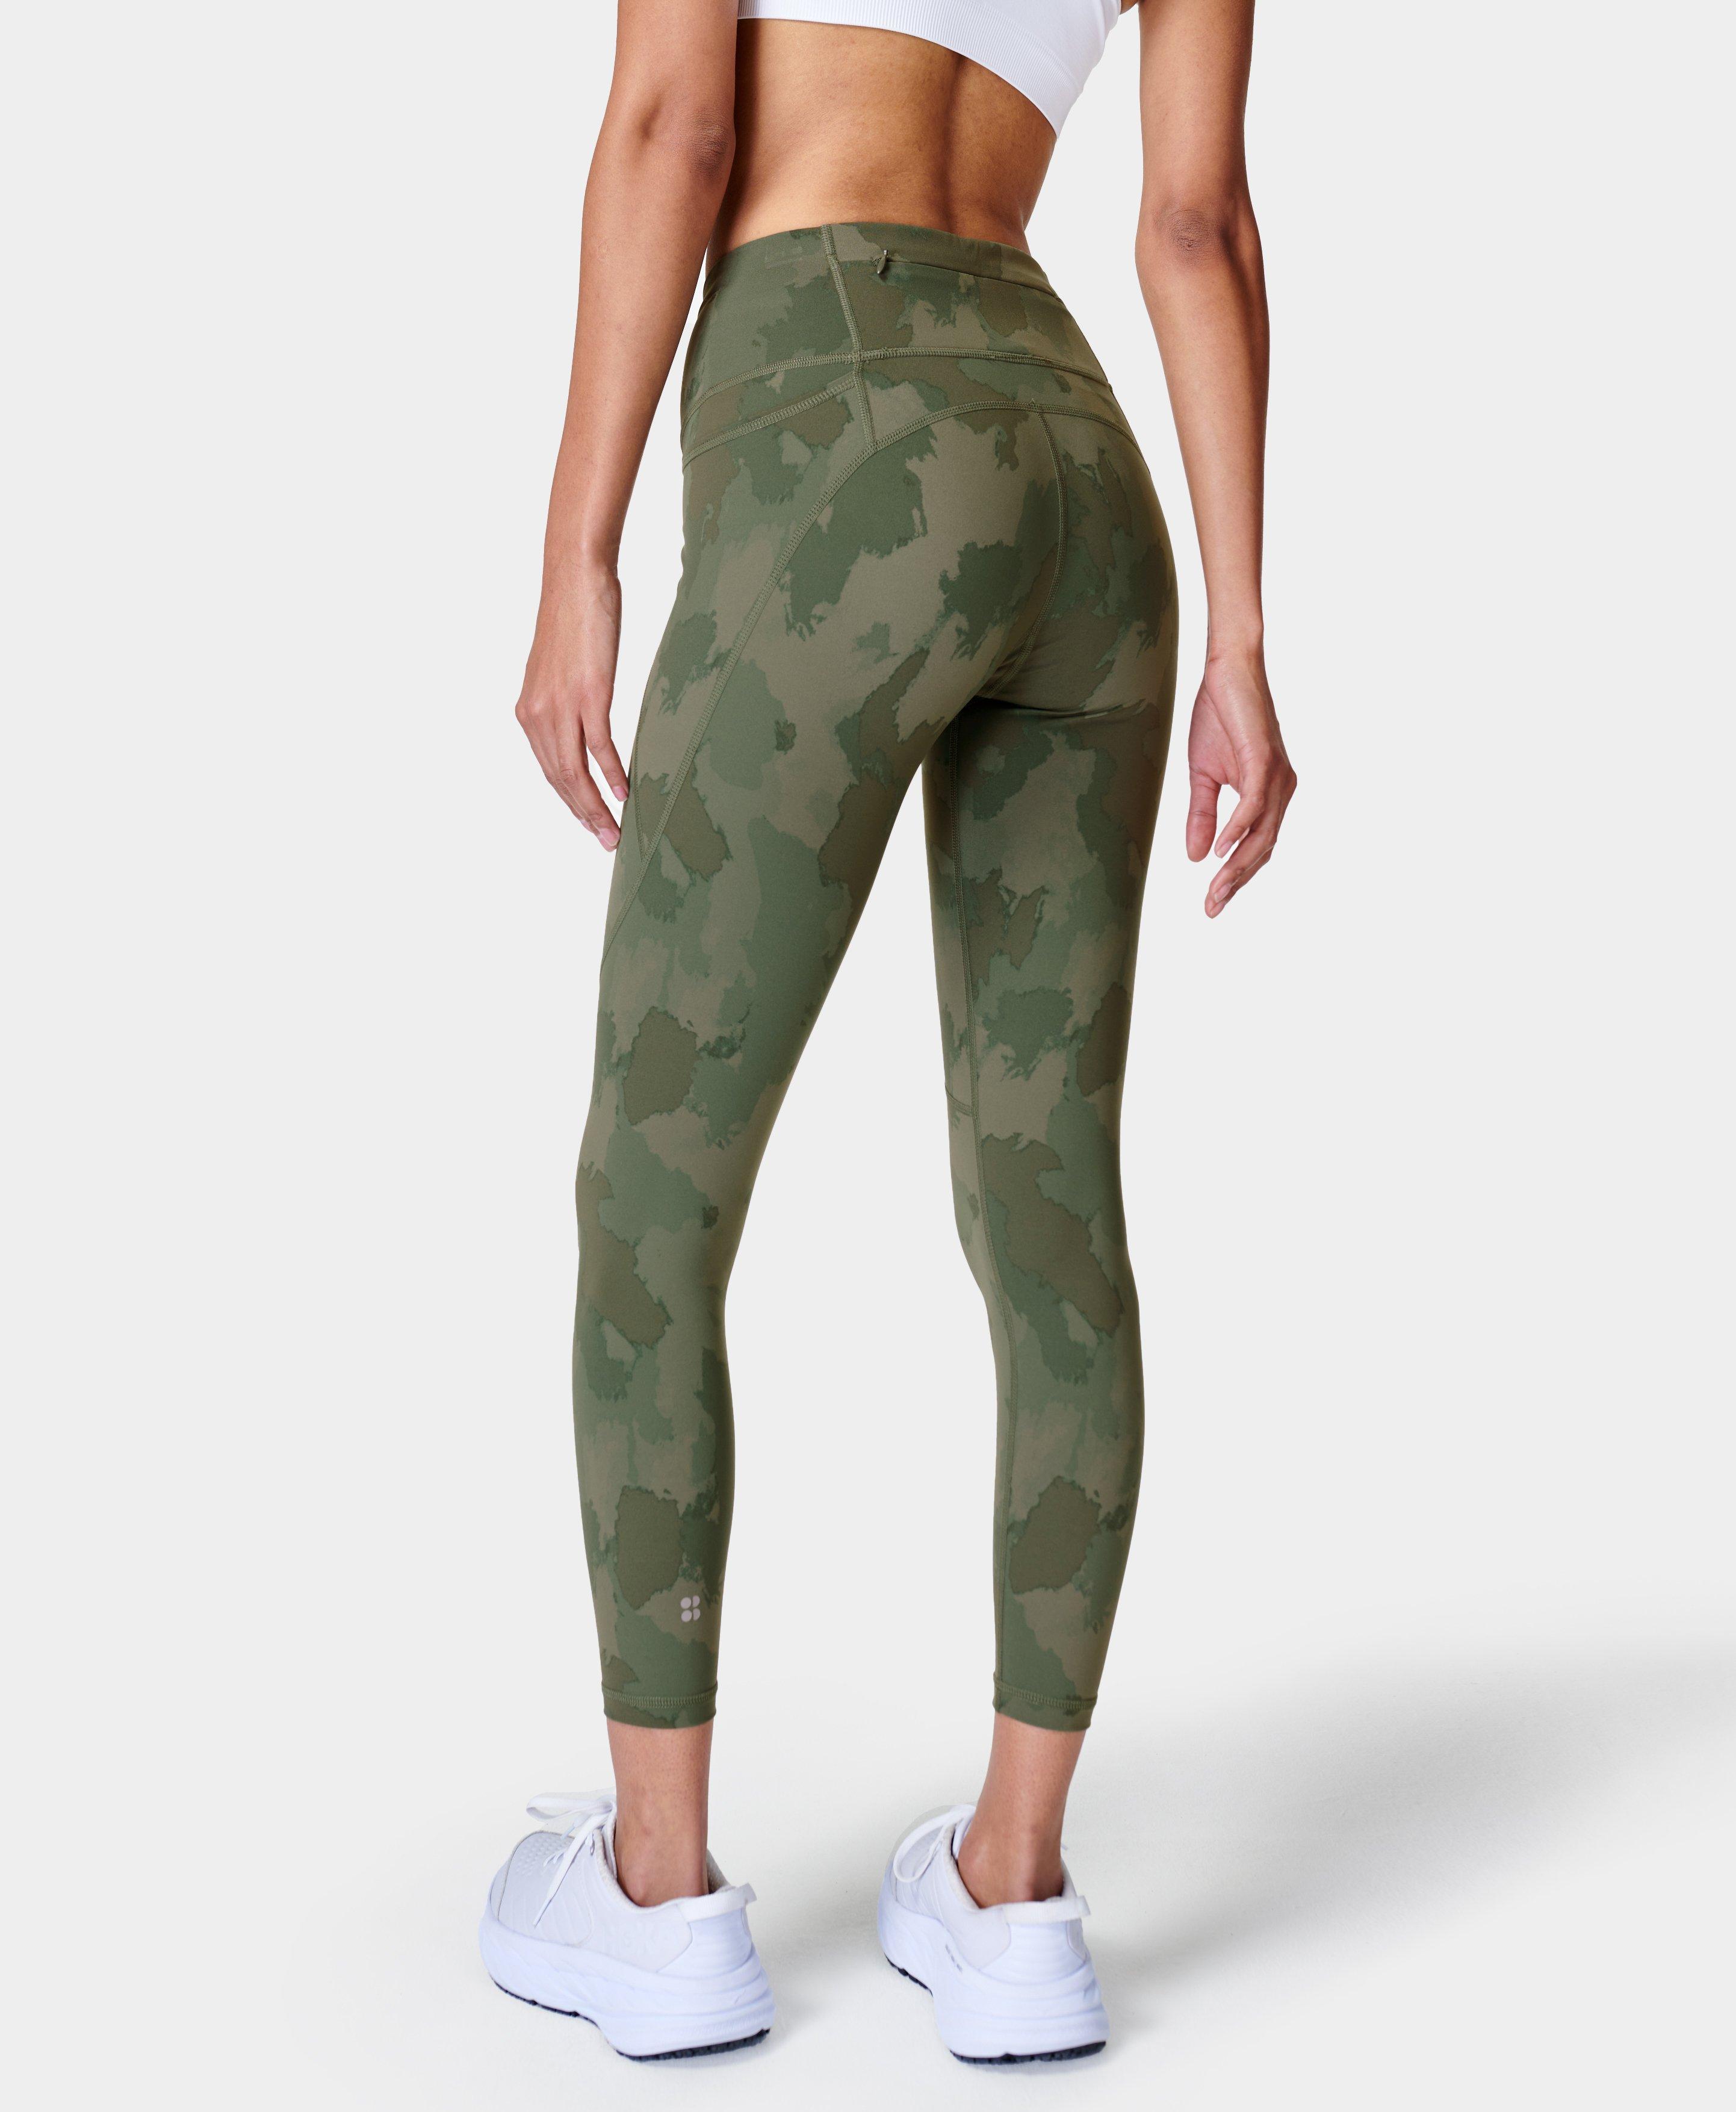 GetUSCart- BALEAF Women's High Waisted 7/8 Length Yoga Leggings Printed  Workout Pattern Ankle Pants with Pockets Army Green Camo Size M